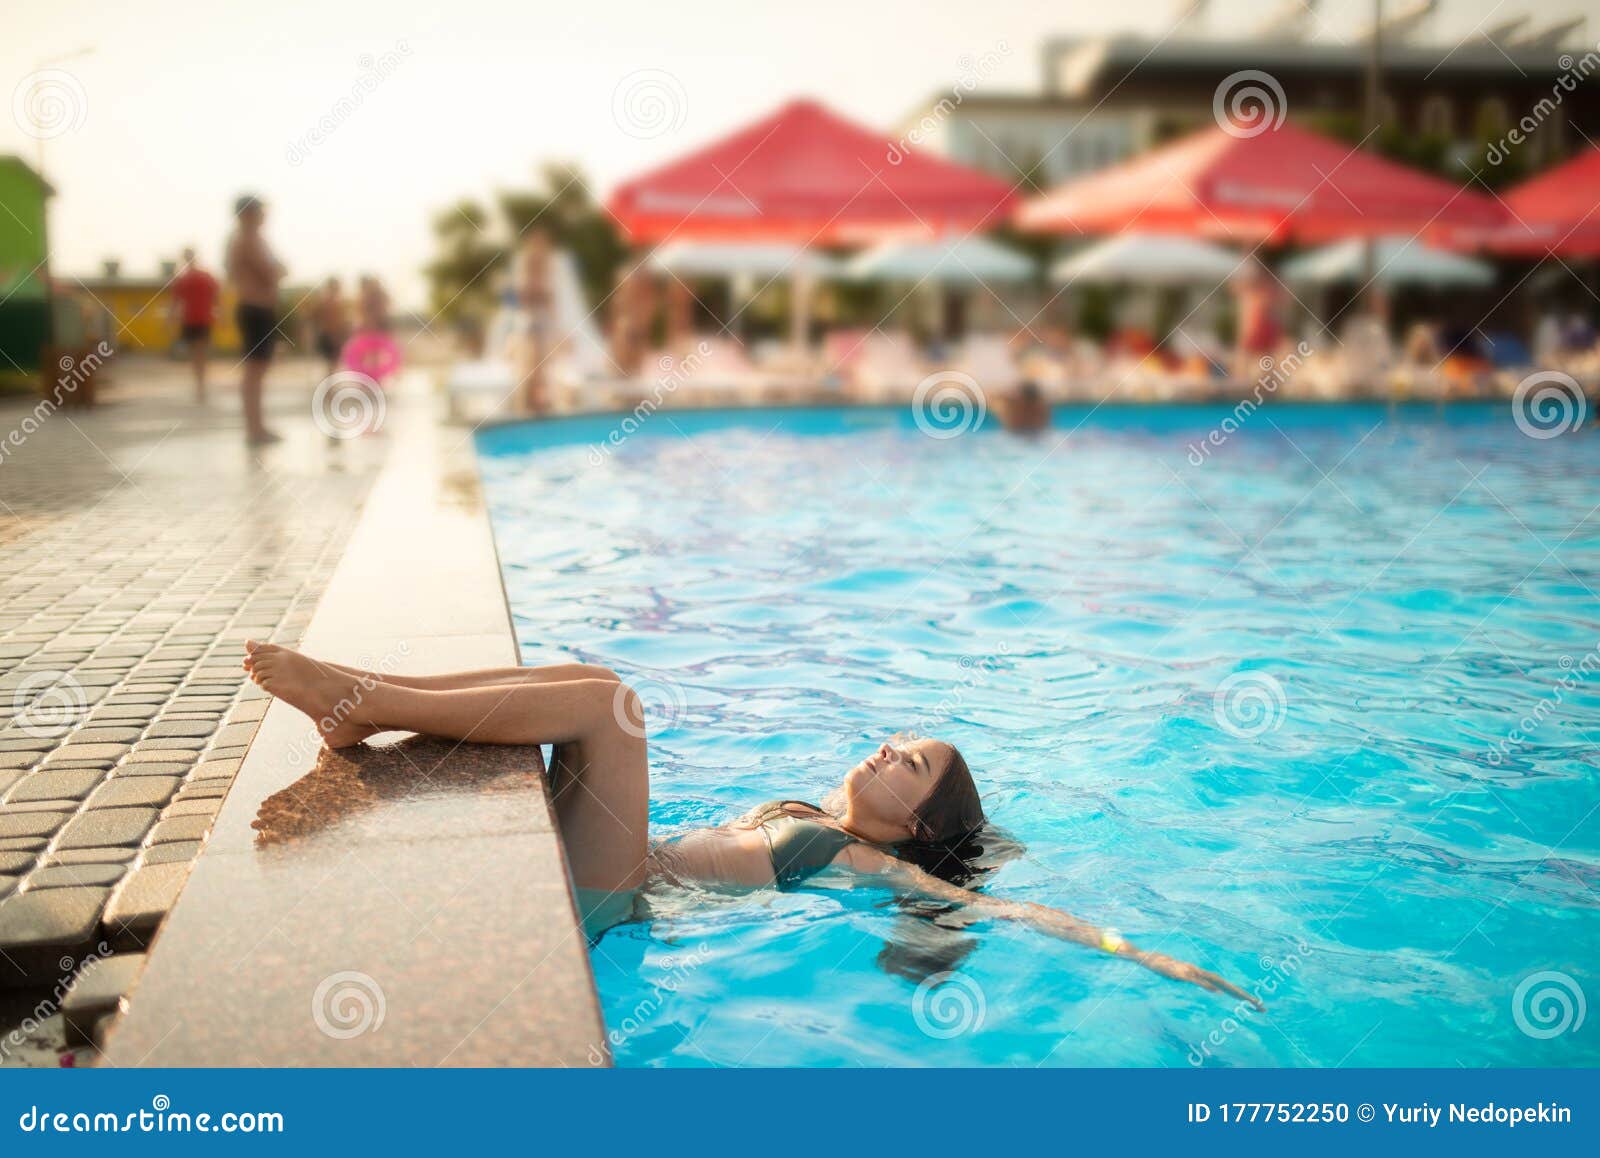 Pretty Little Girl In Swimming Stock Image - Image 